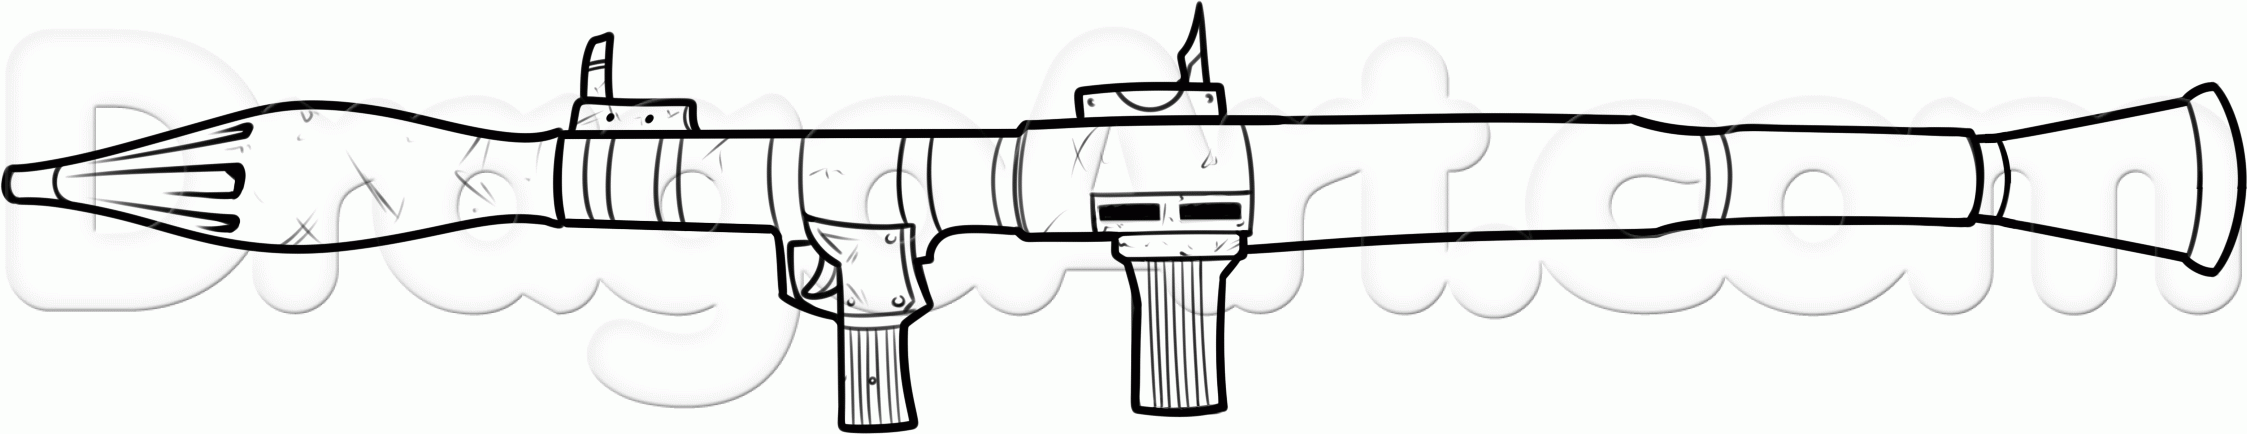 how-to-draw-a-rocket-launcher-step-8_1_000000167610_5